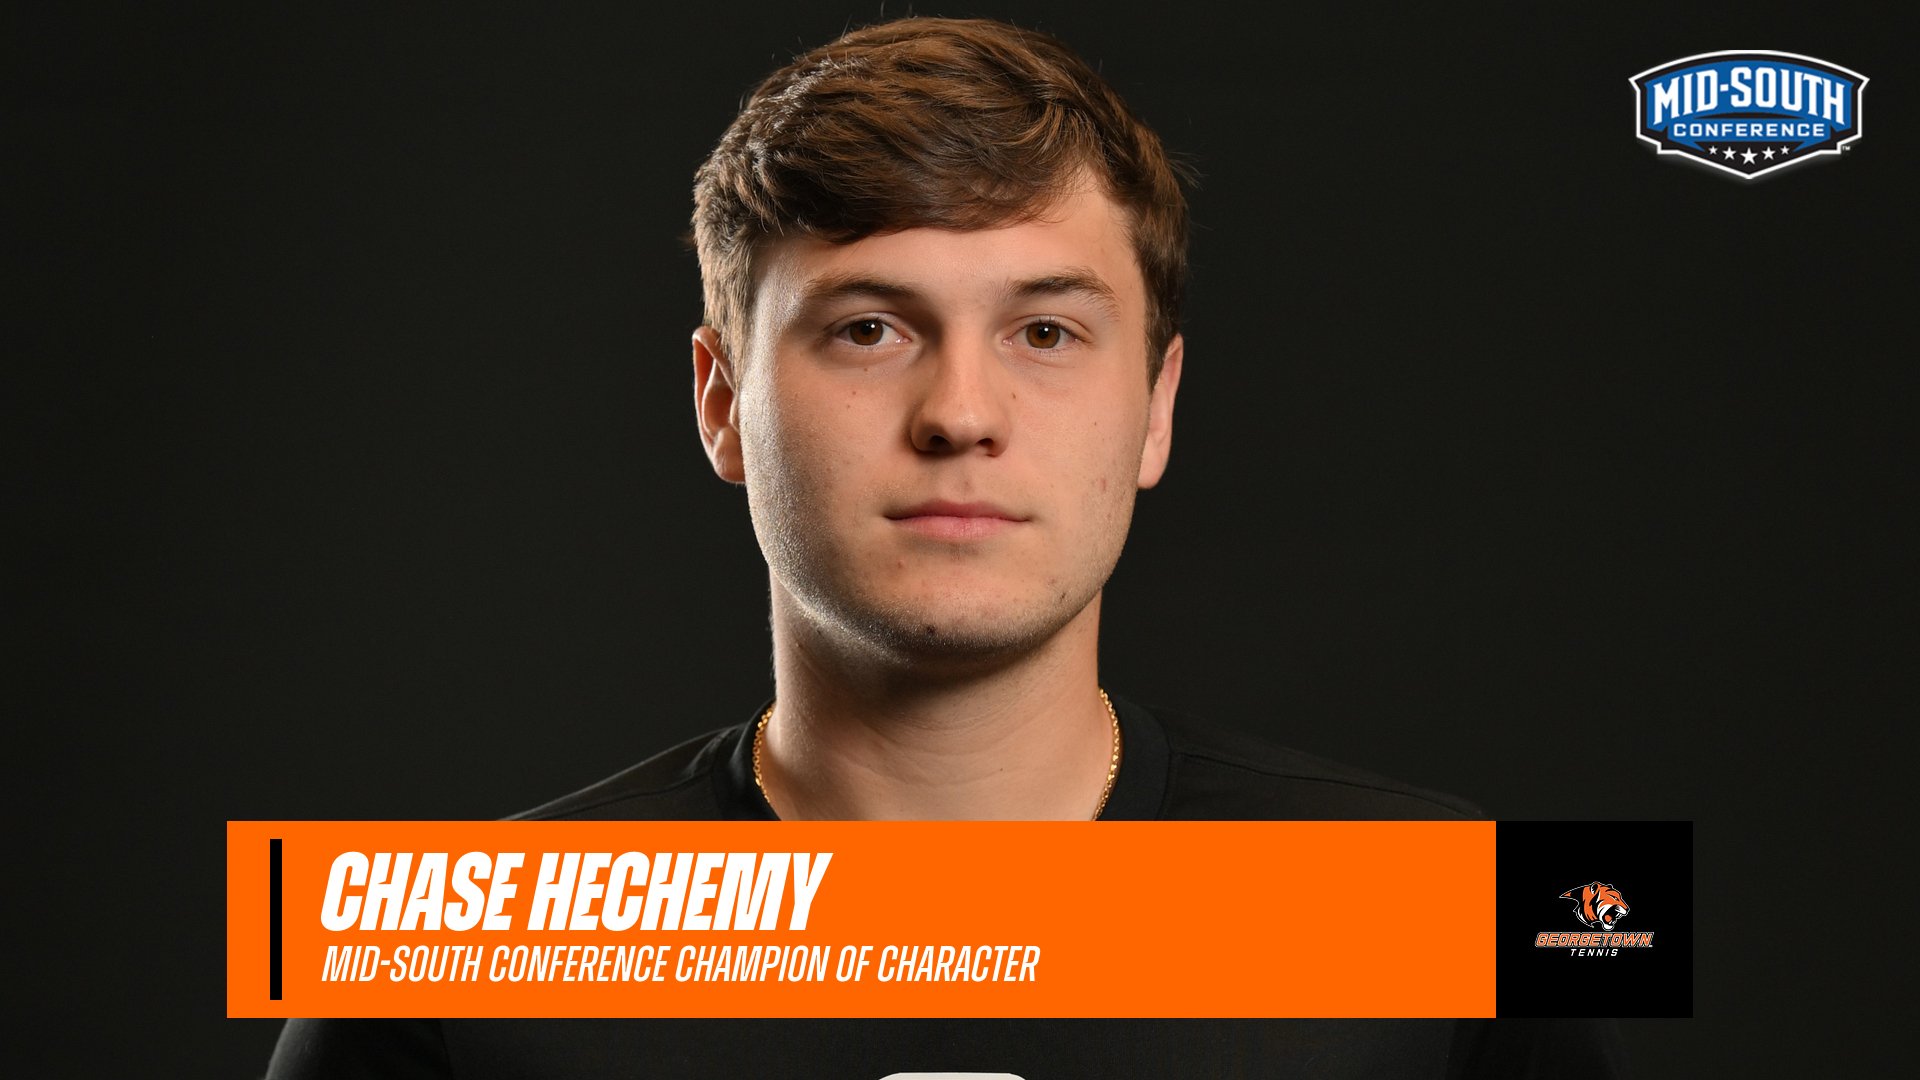 Chase Hechemy named MSC Champion of Character